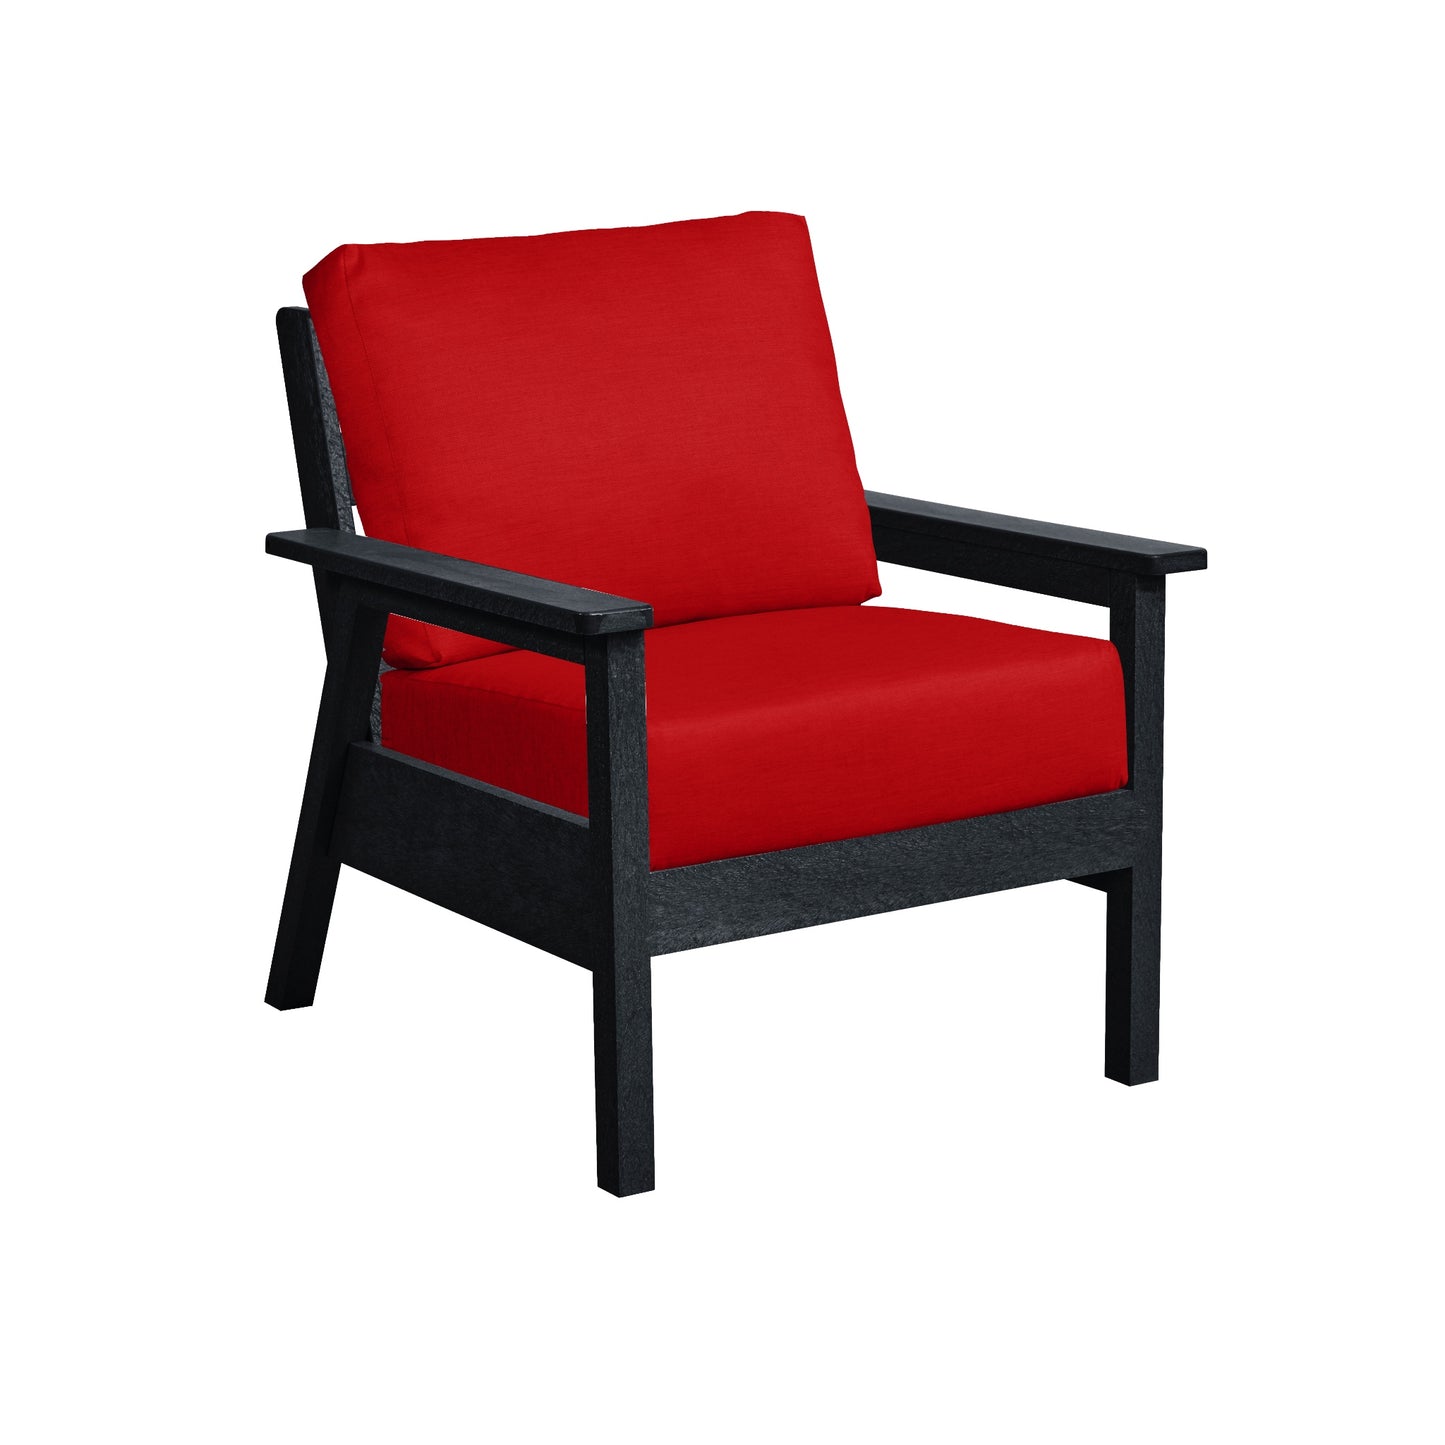 Tofino Chair Black FRAME WITH CUSHIONS - DSF281 [DSF241]